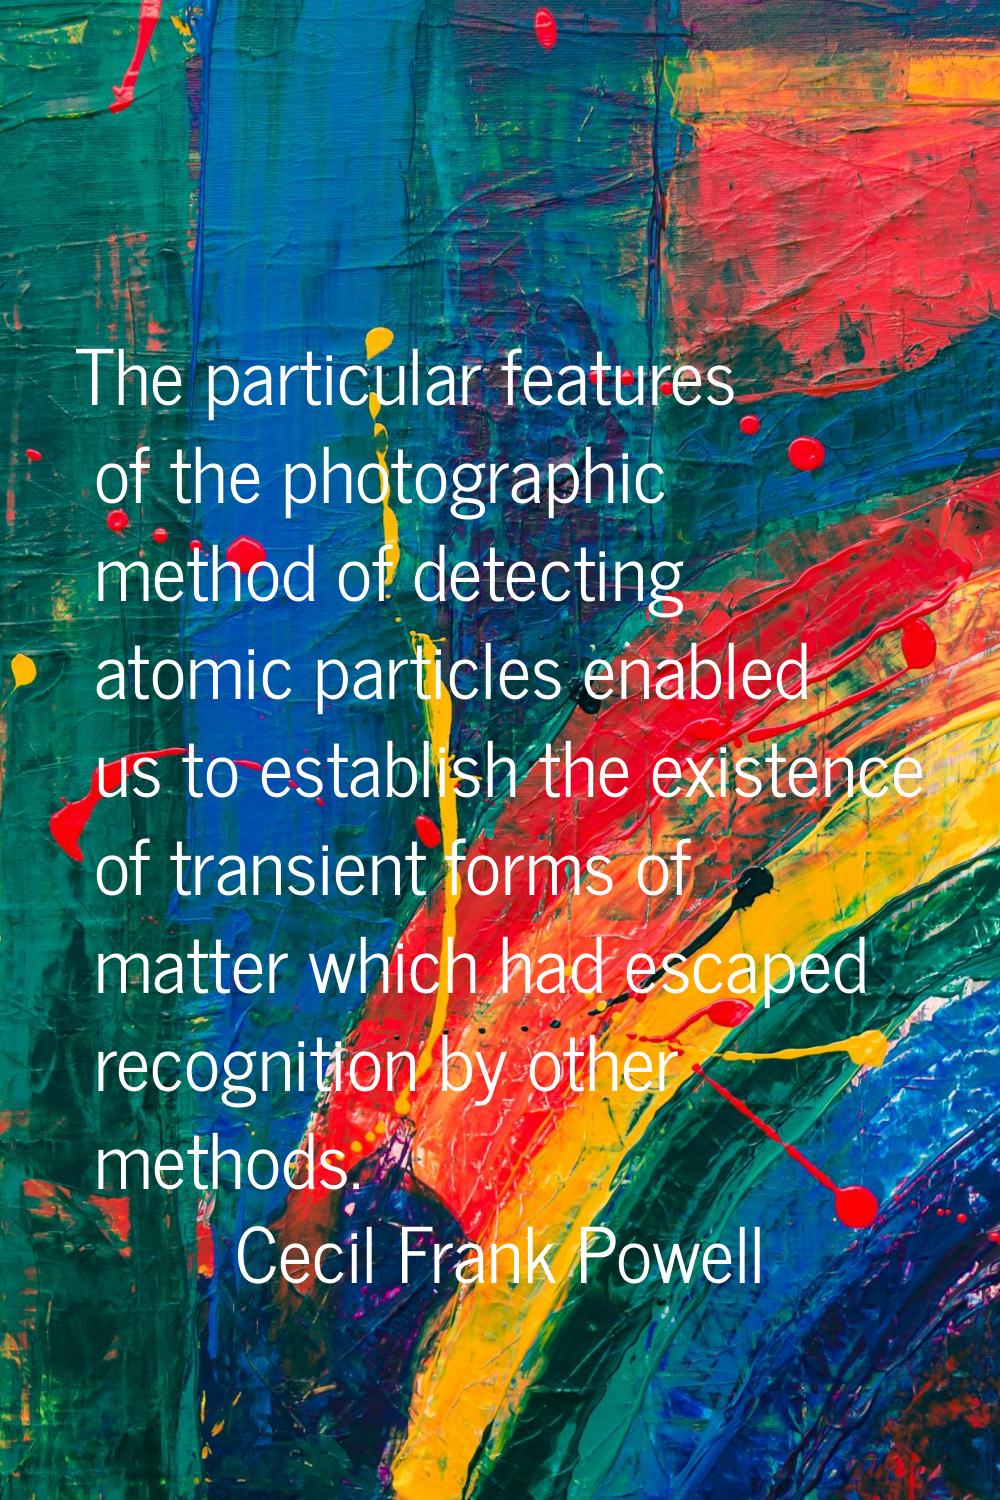 The particular features of the photographic method of detecting atomic particles enabled us to esta